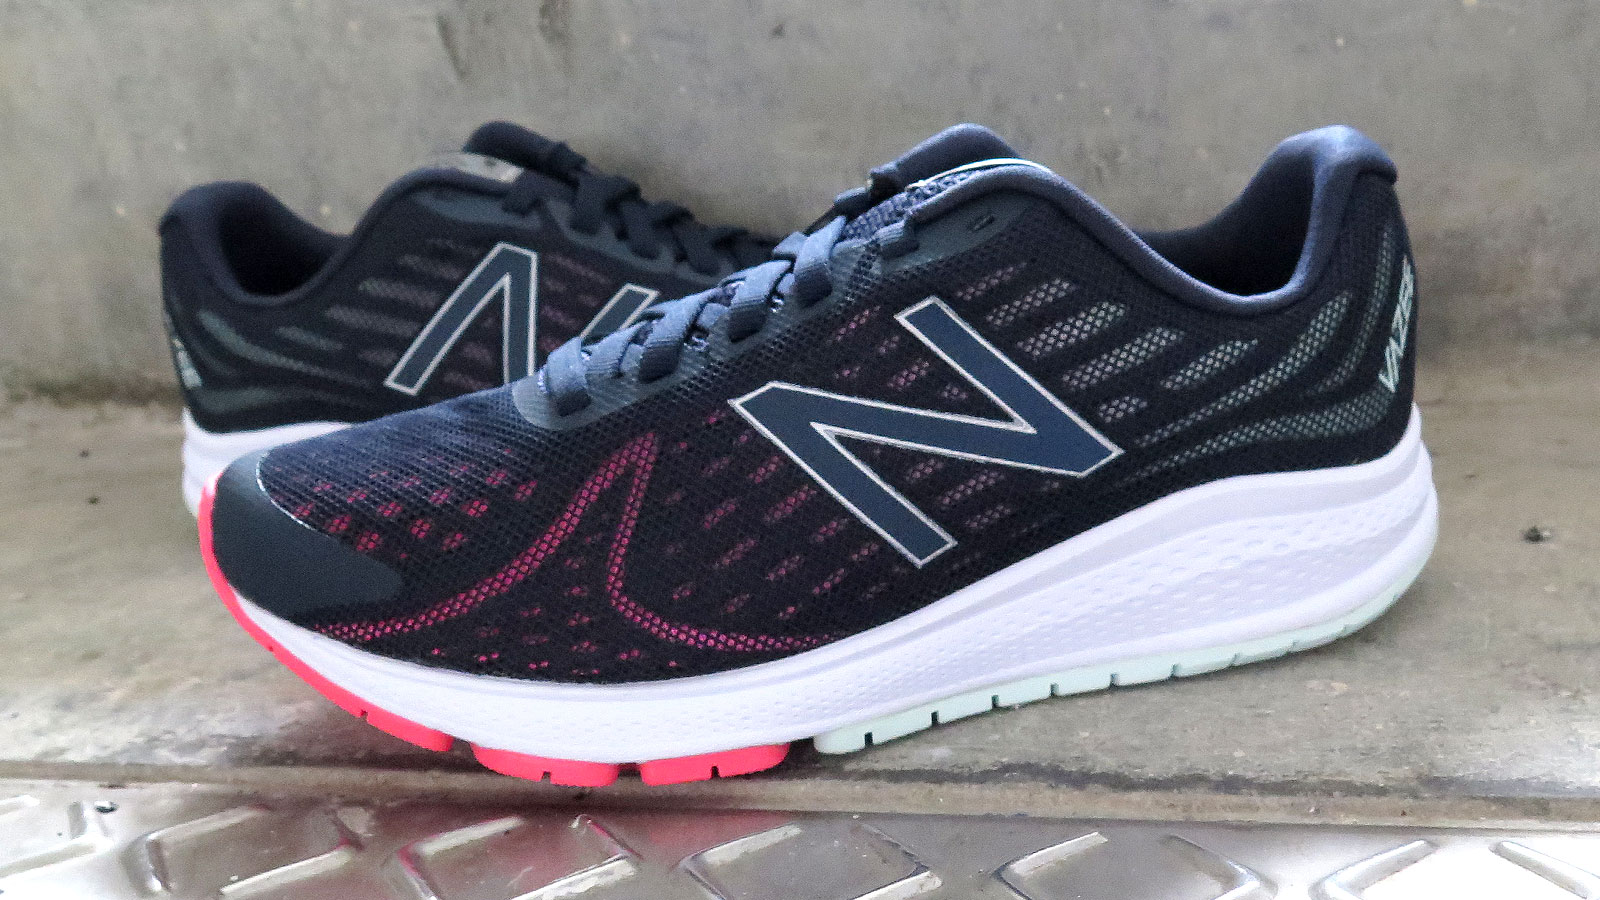 Lol every time staff How The New Balance Vazee Rush v2 Women's Shoes Help Me Find Balance